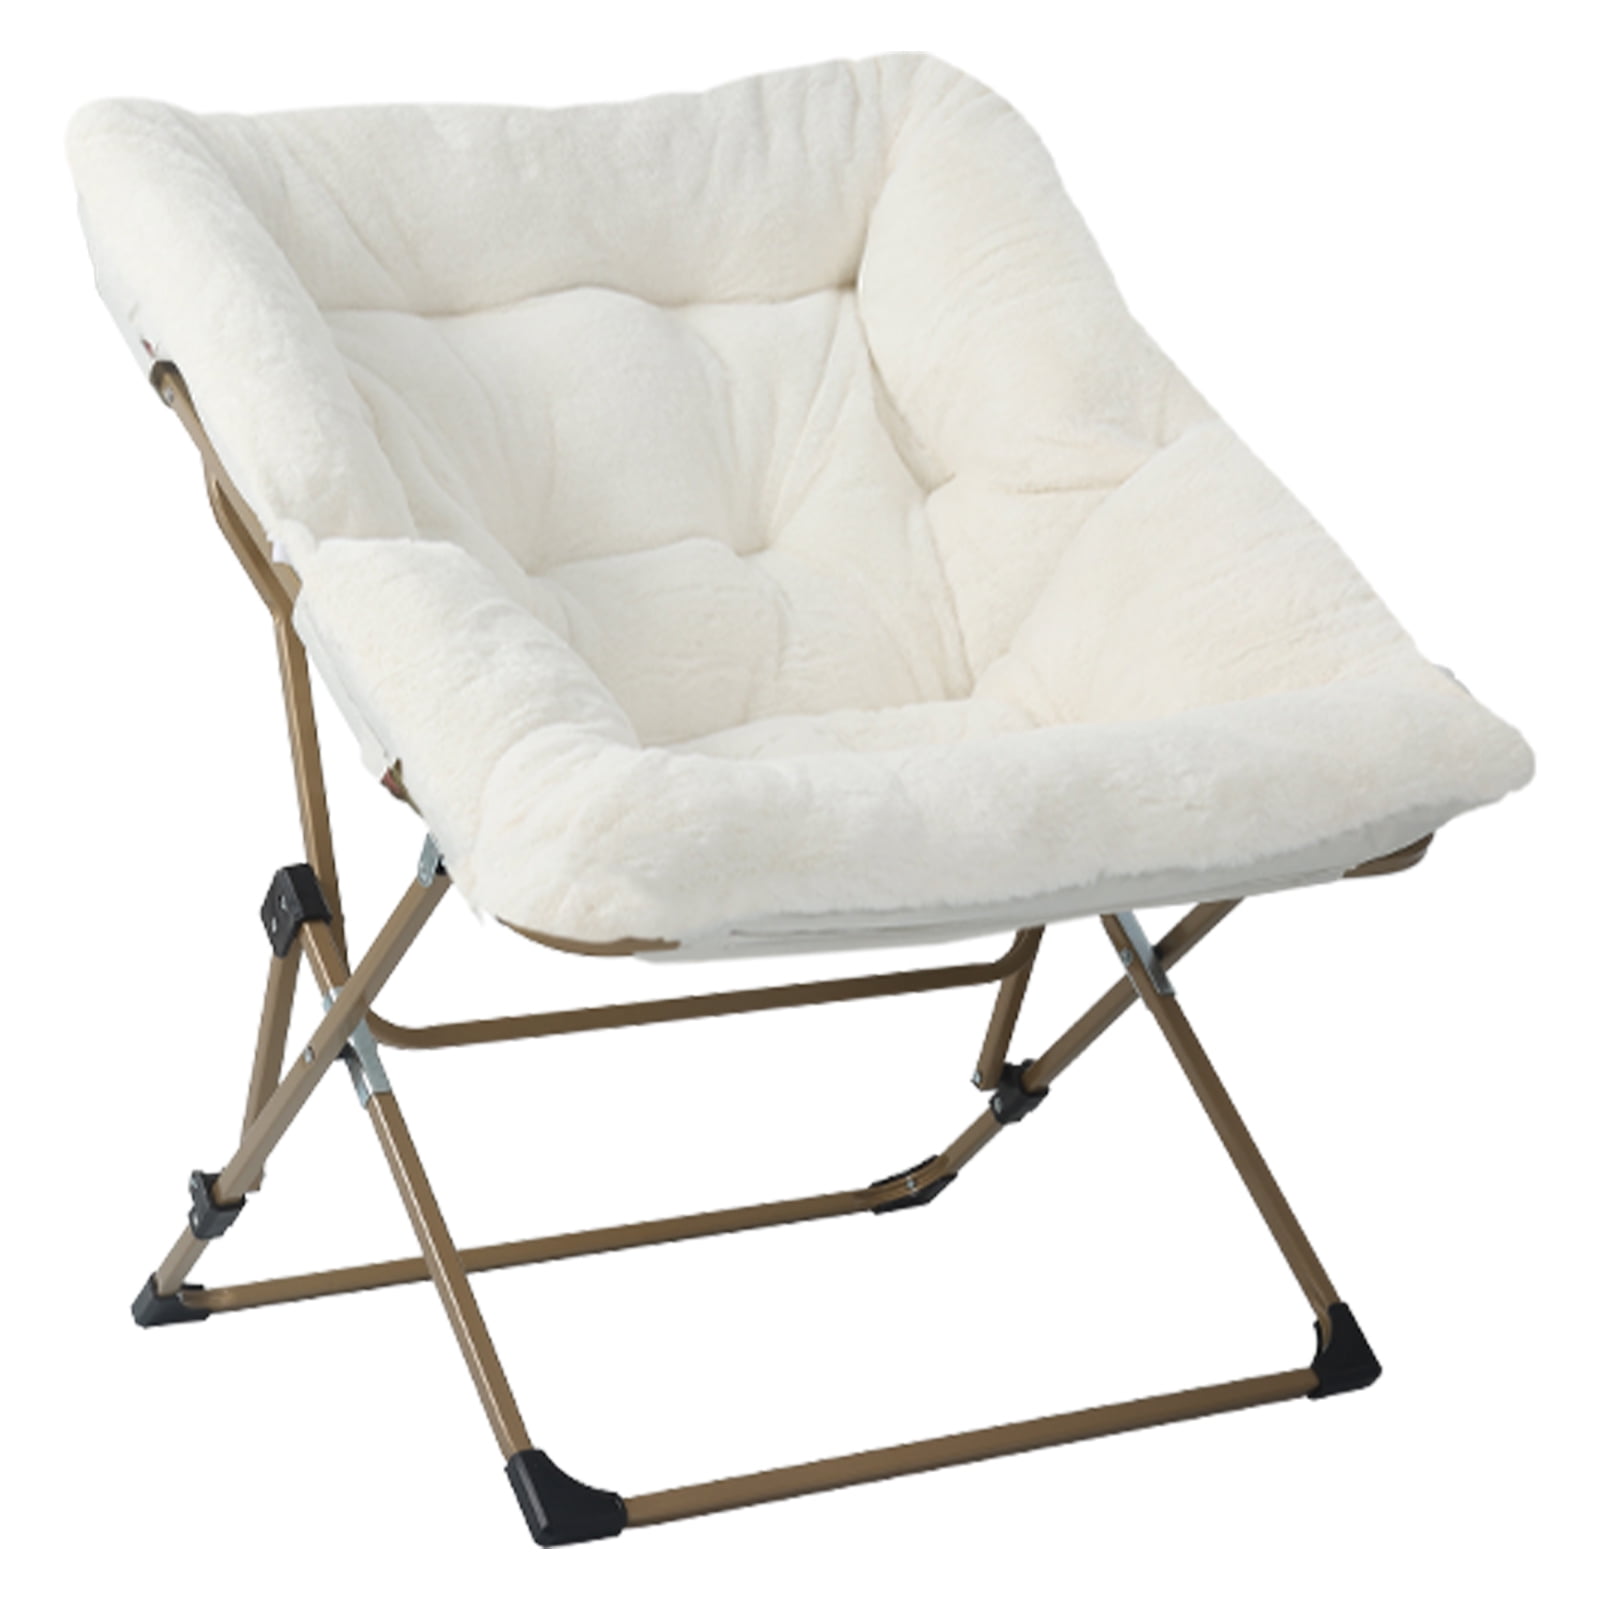 Buy White Cushions for Folding Chair